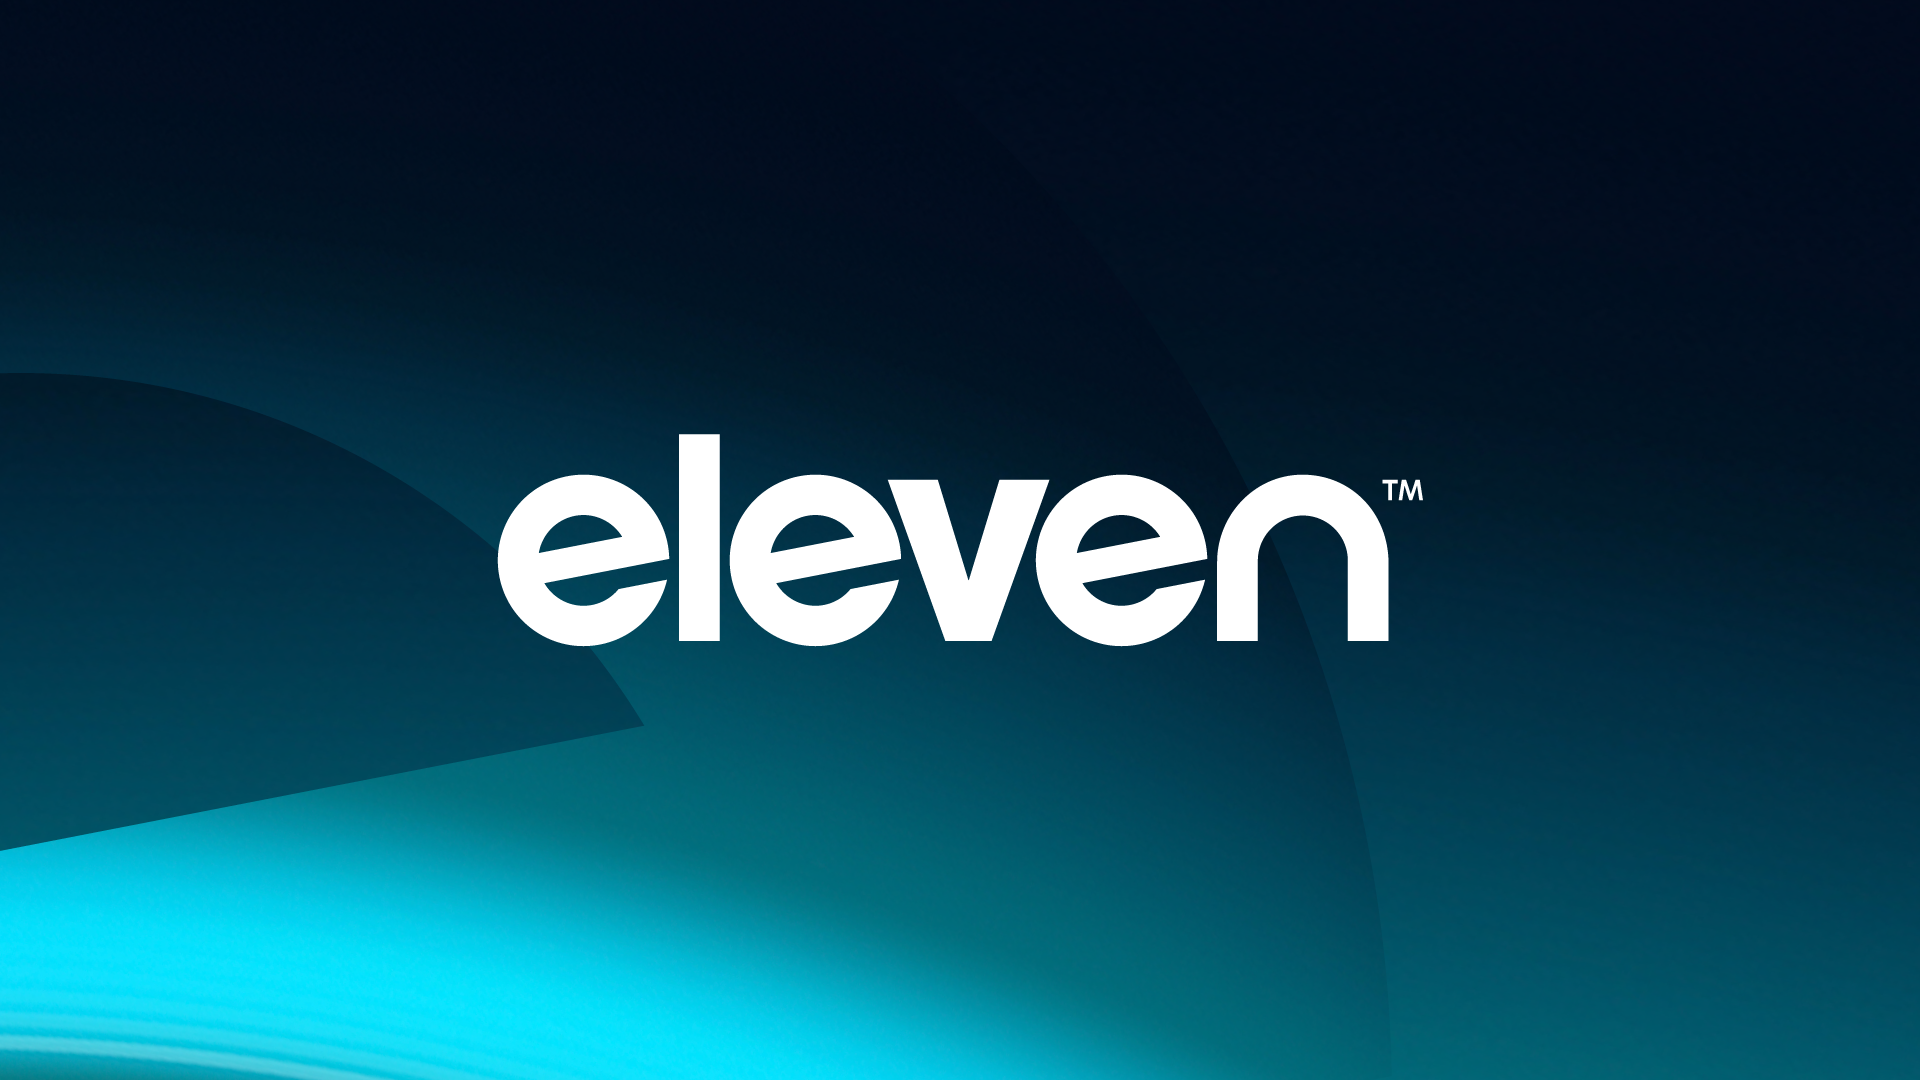 the word 'eleven' on a dynamic blue background